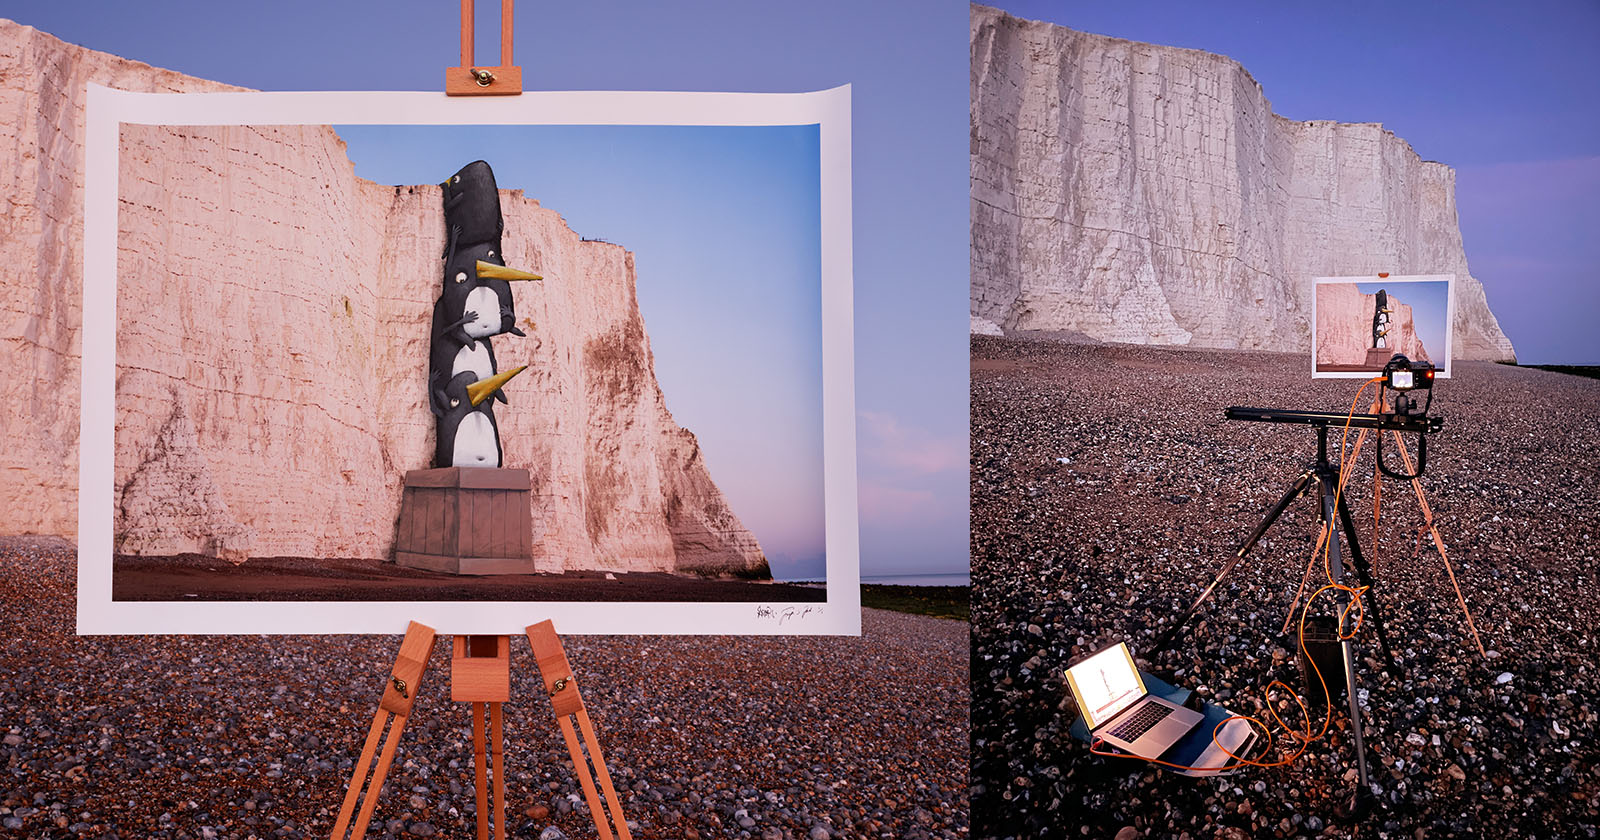 Photographer’s Cleverly Brings Road Artwork to ‘Not possible’ Locations